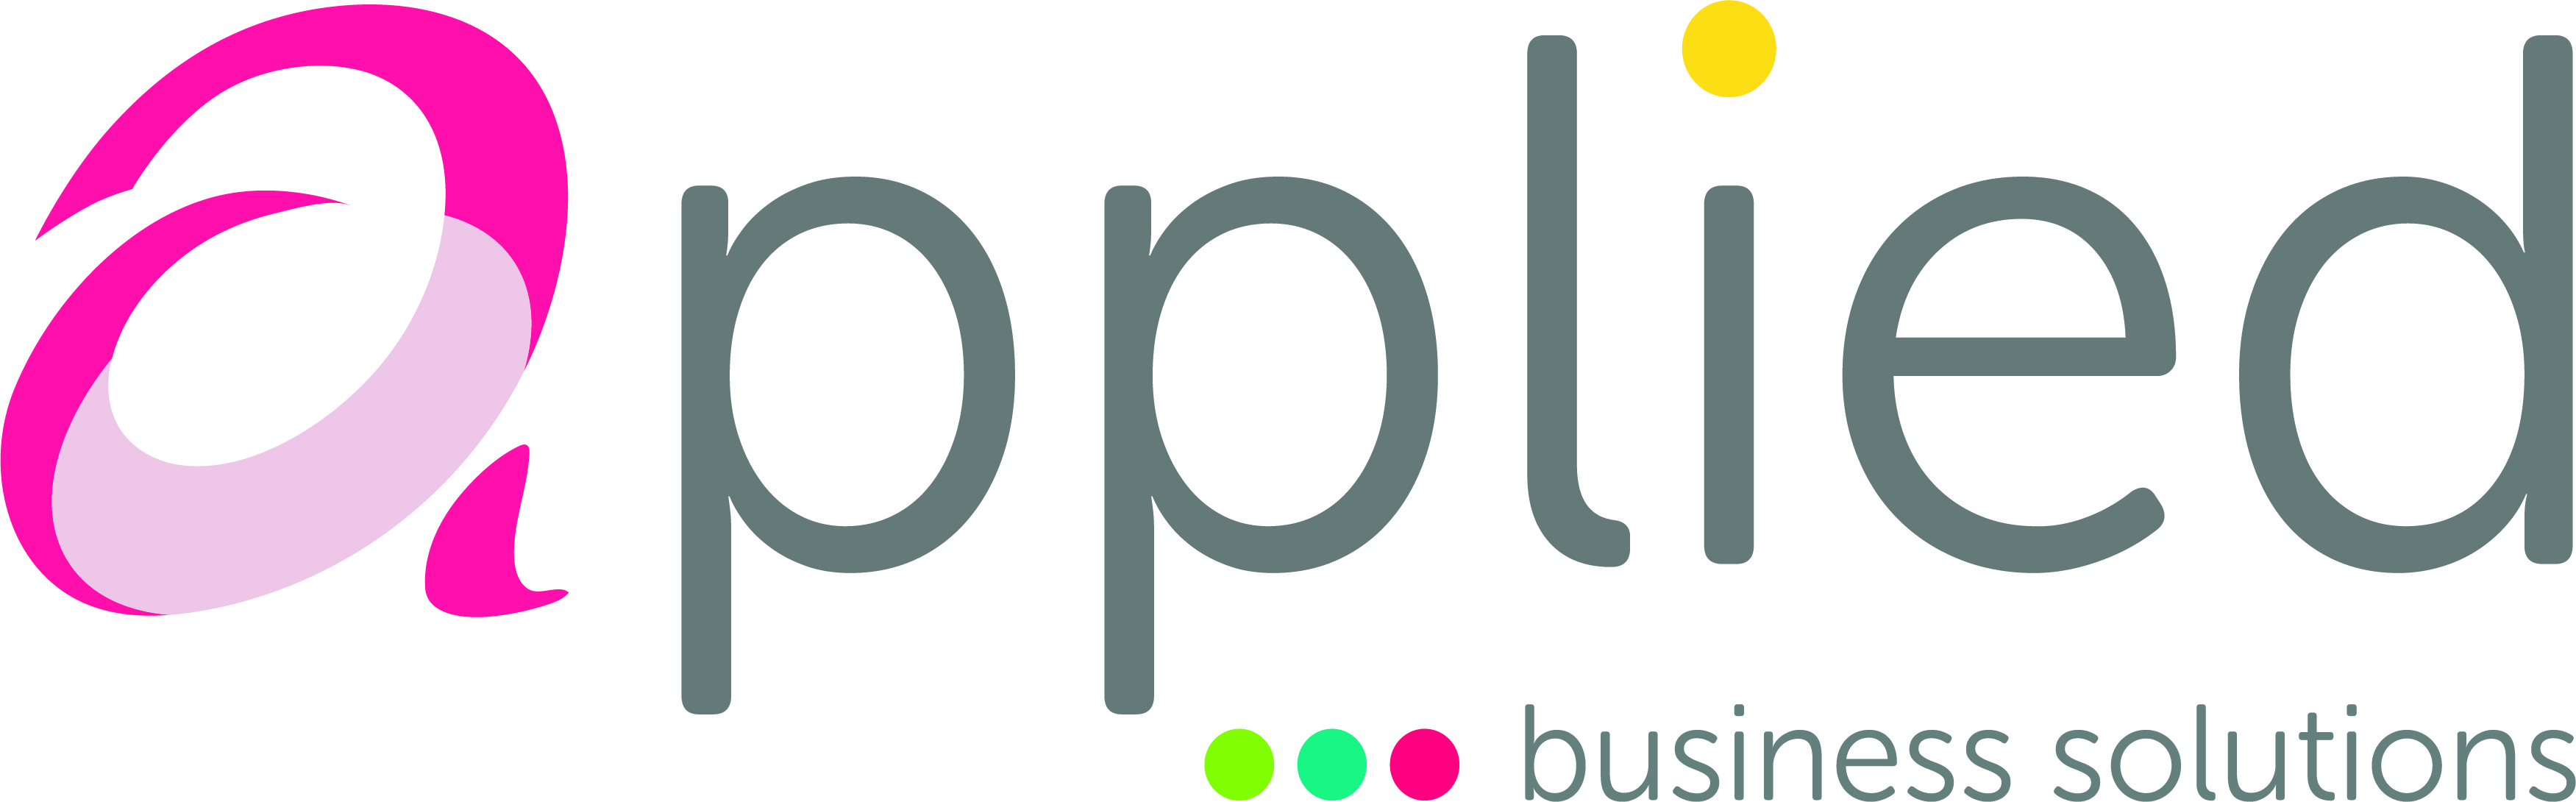 Applied Business Solutions Logo